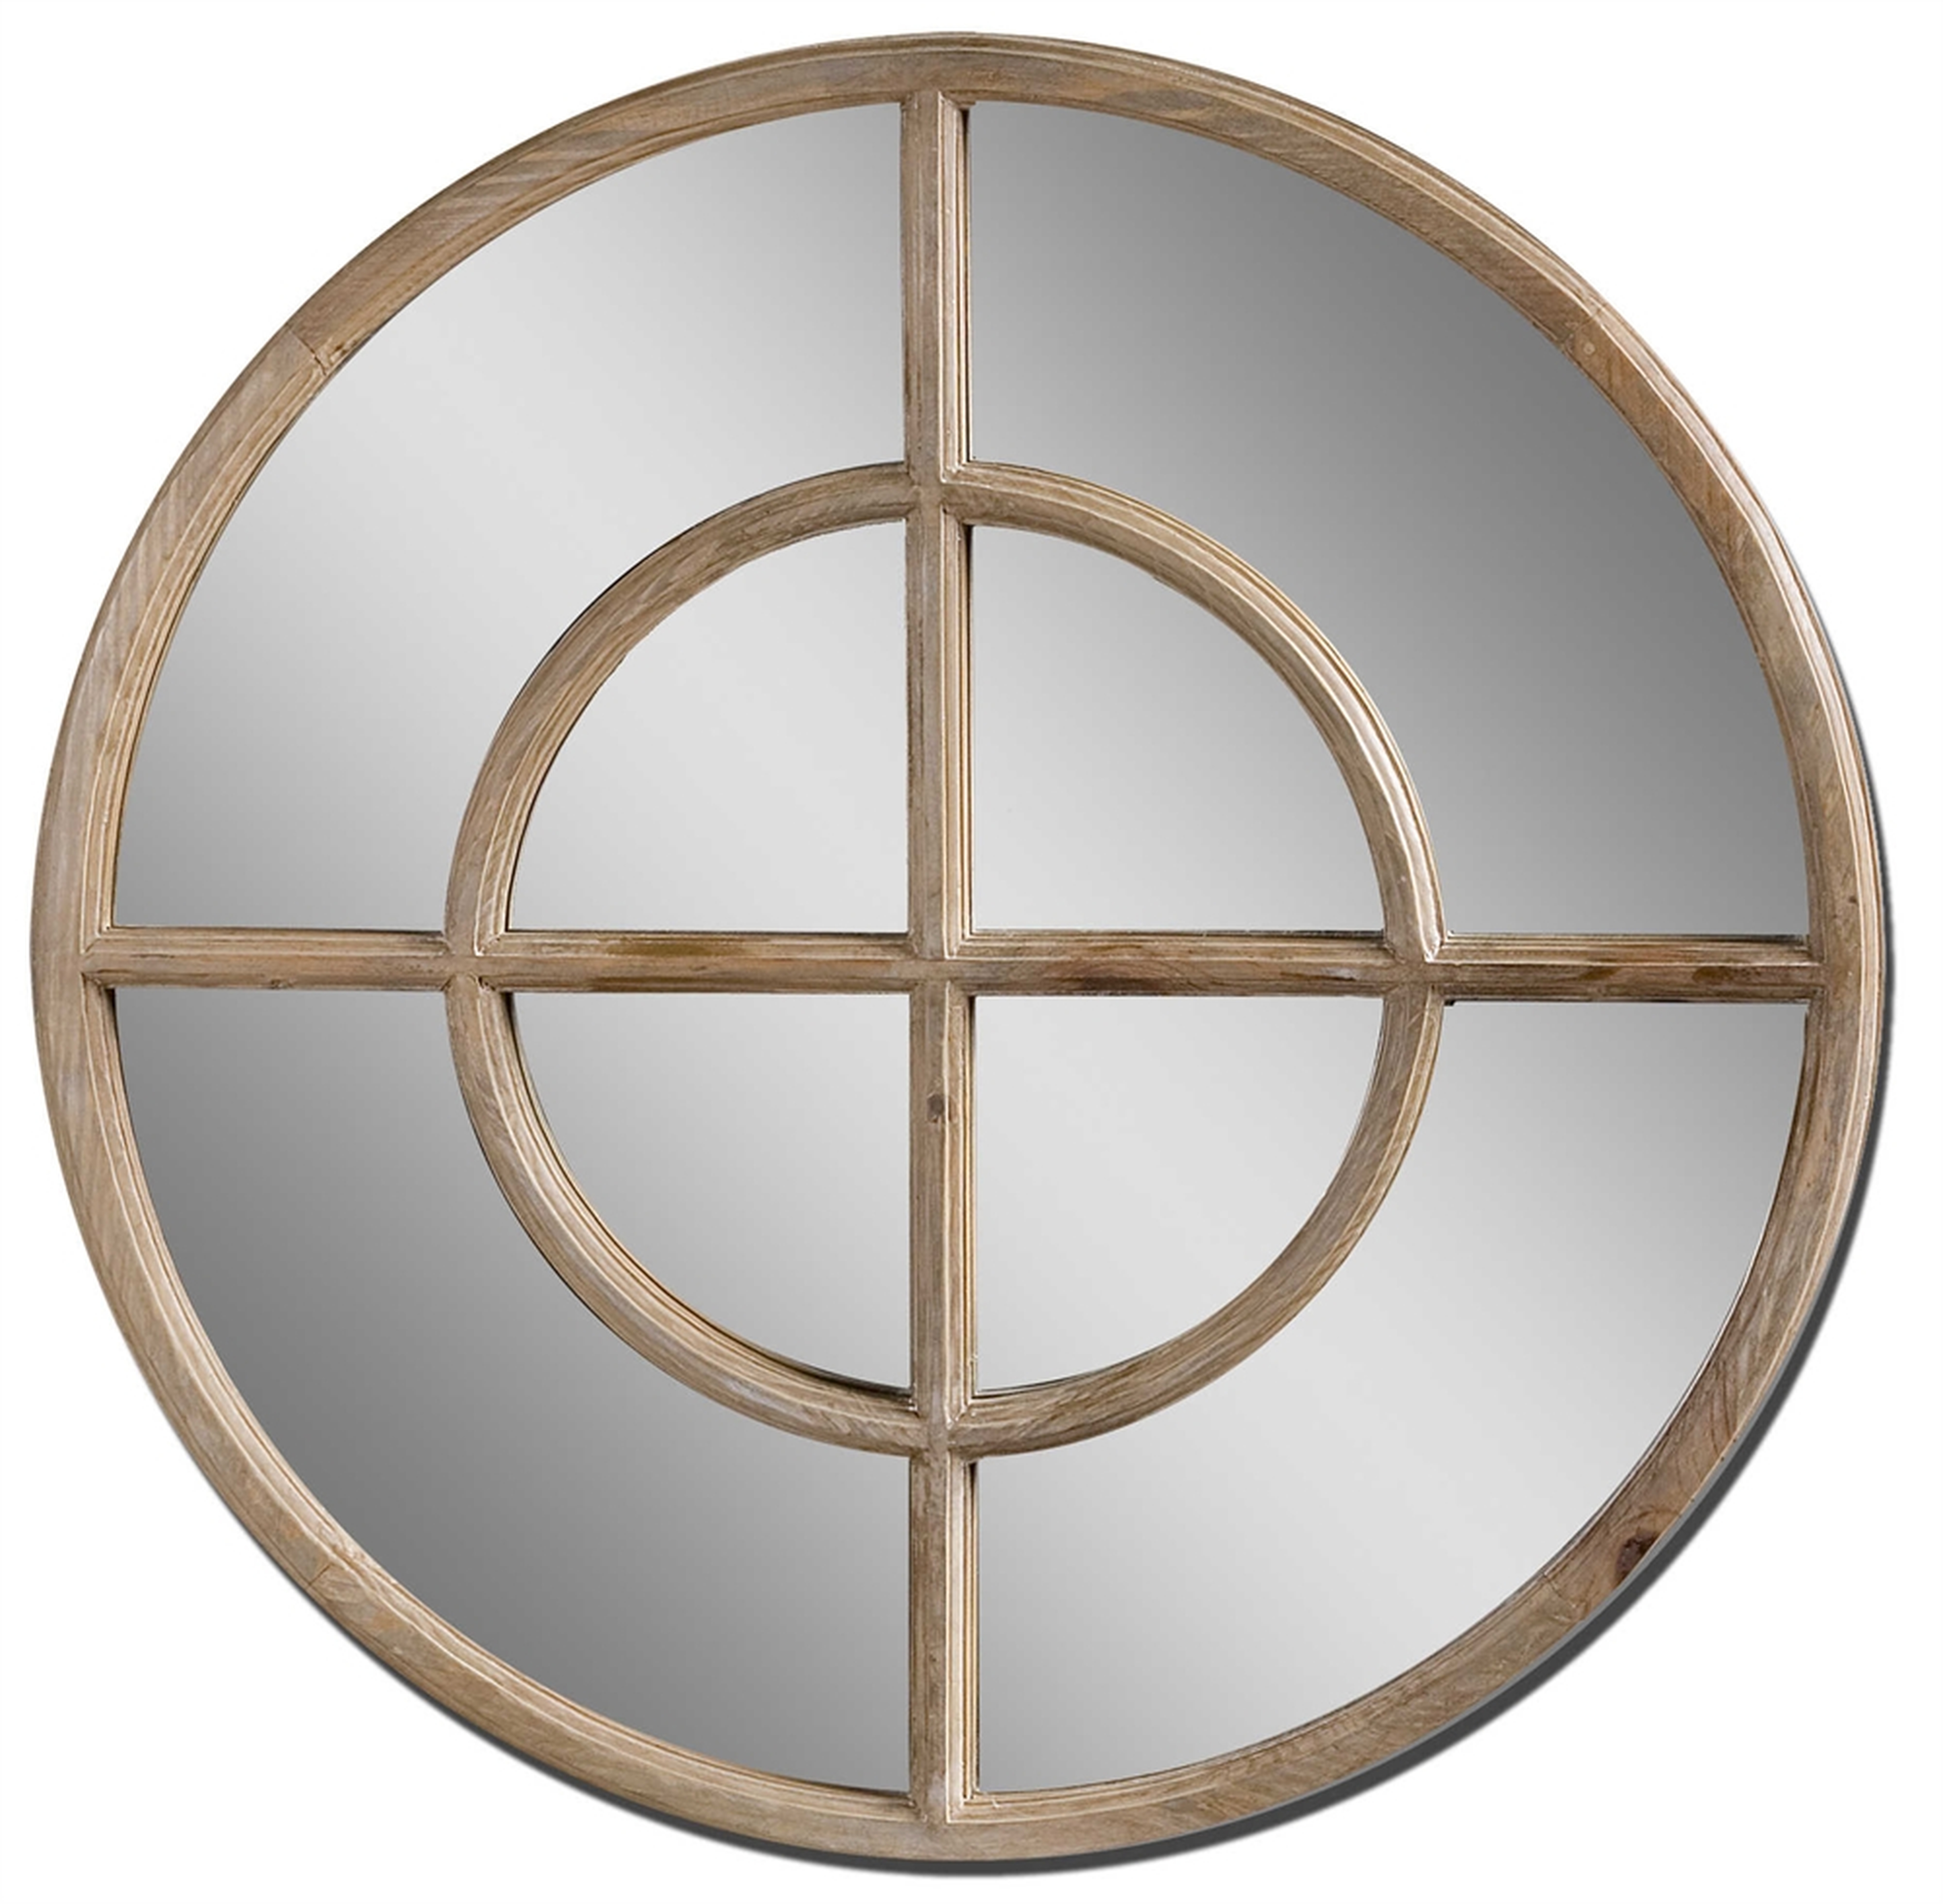 Eliseo Round Mirror NO LONGER AVAIL - Hudsonhill Foundry